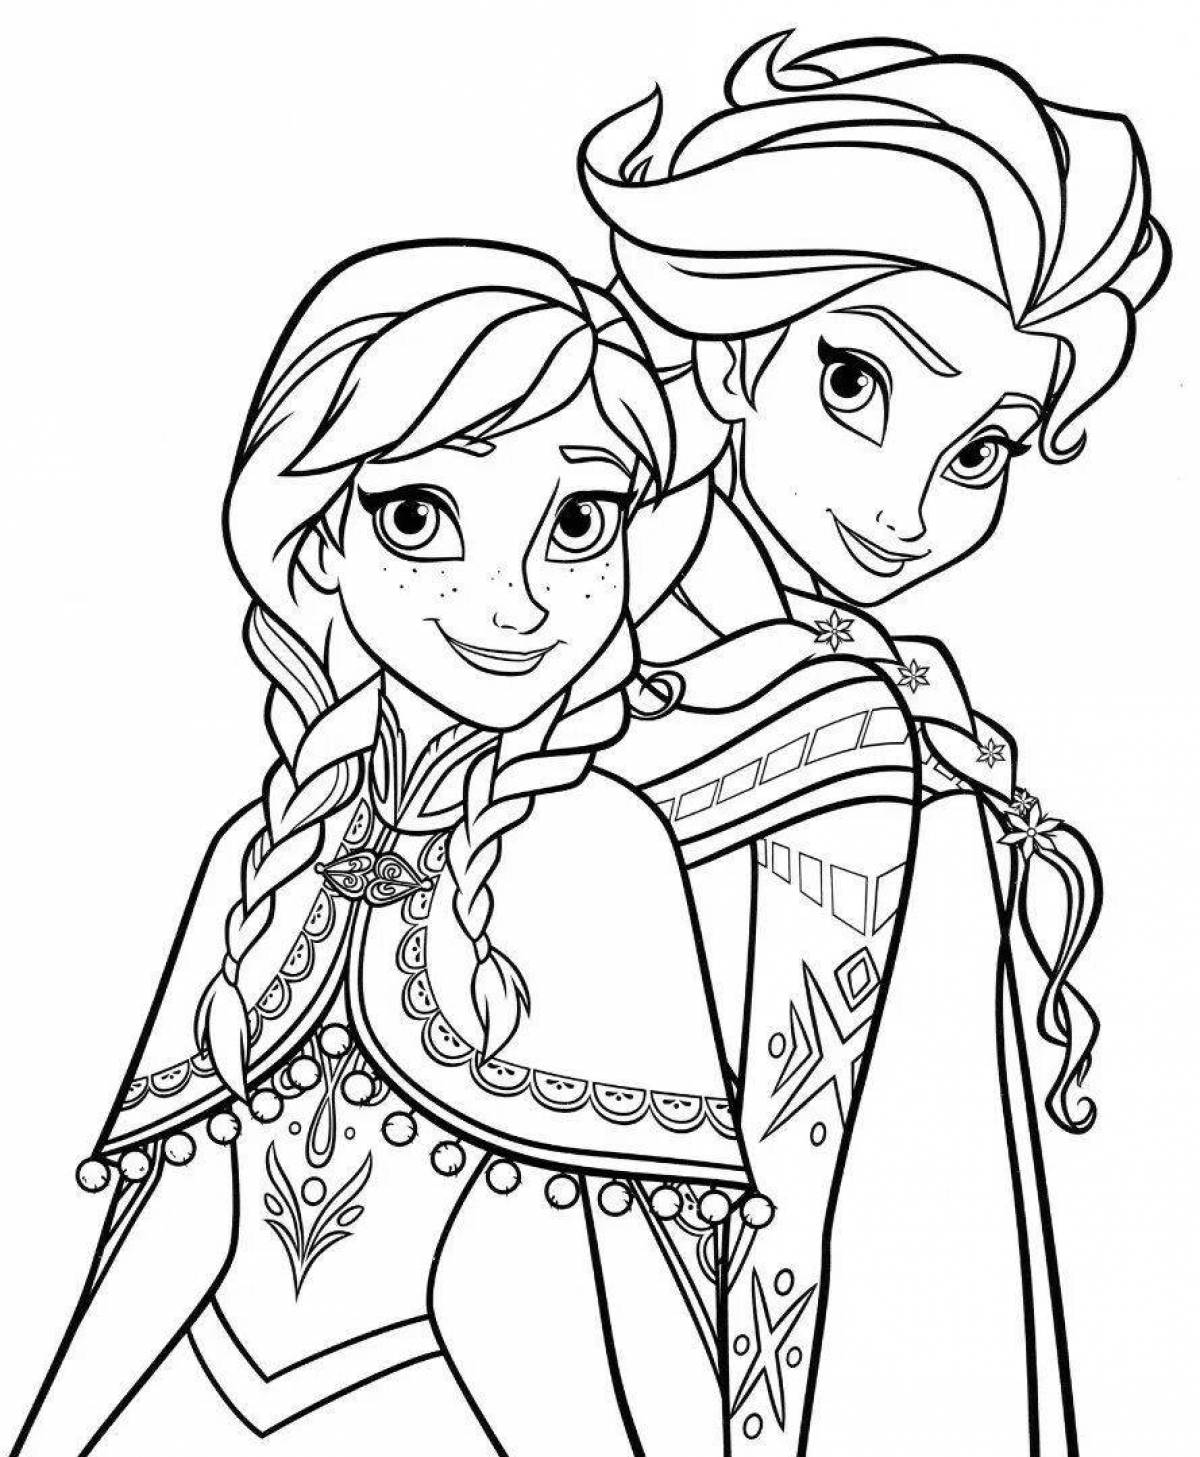 Delightful coloring elsa and anna frozen 2